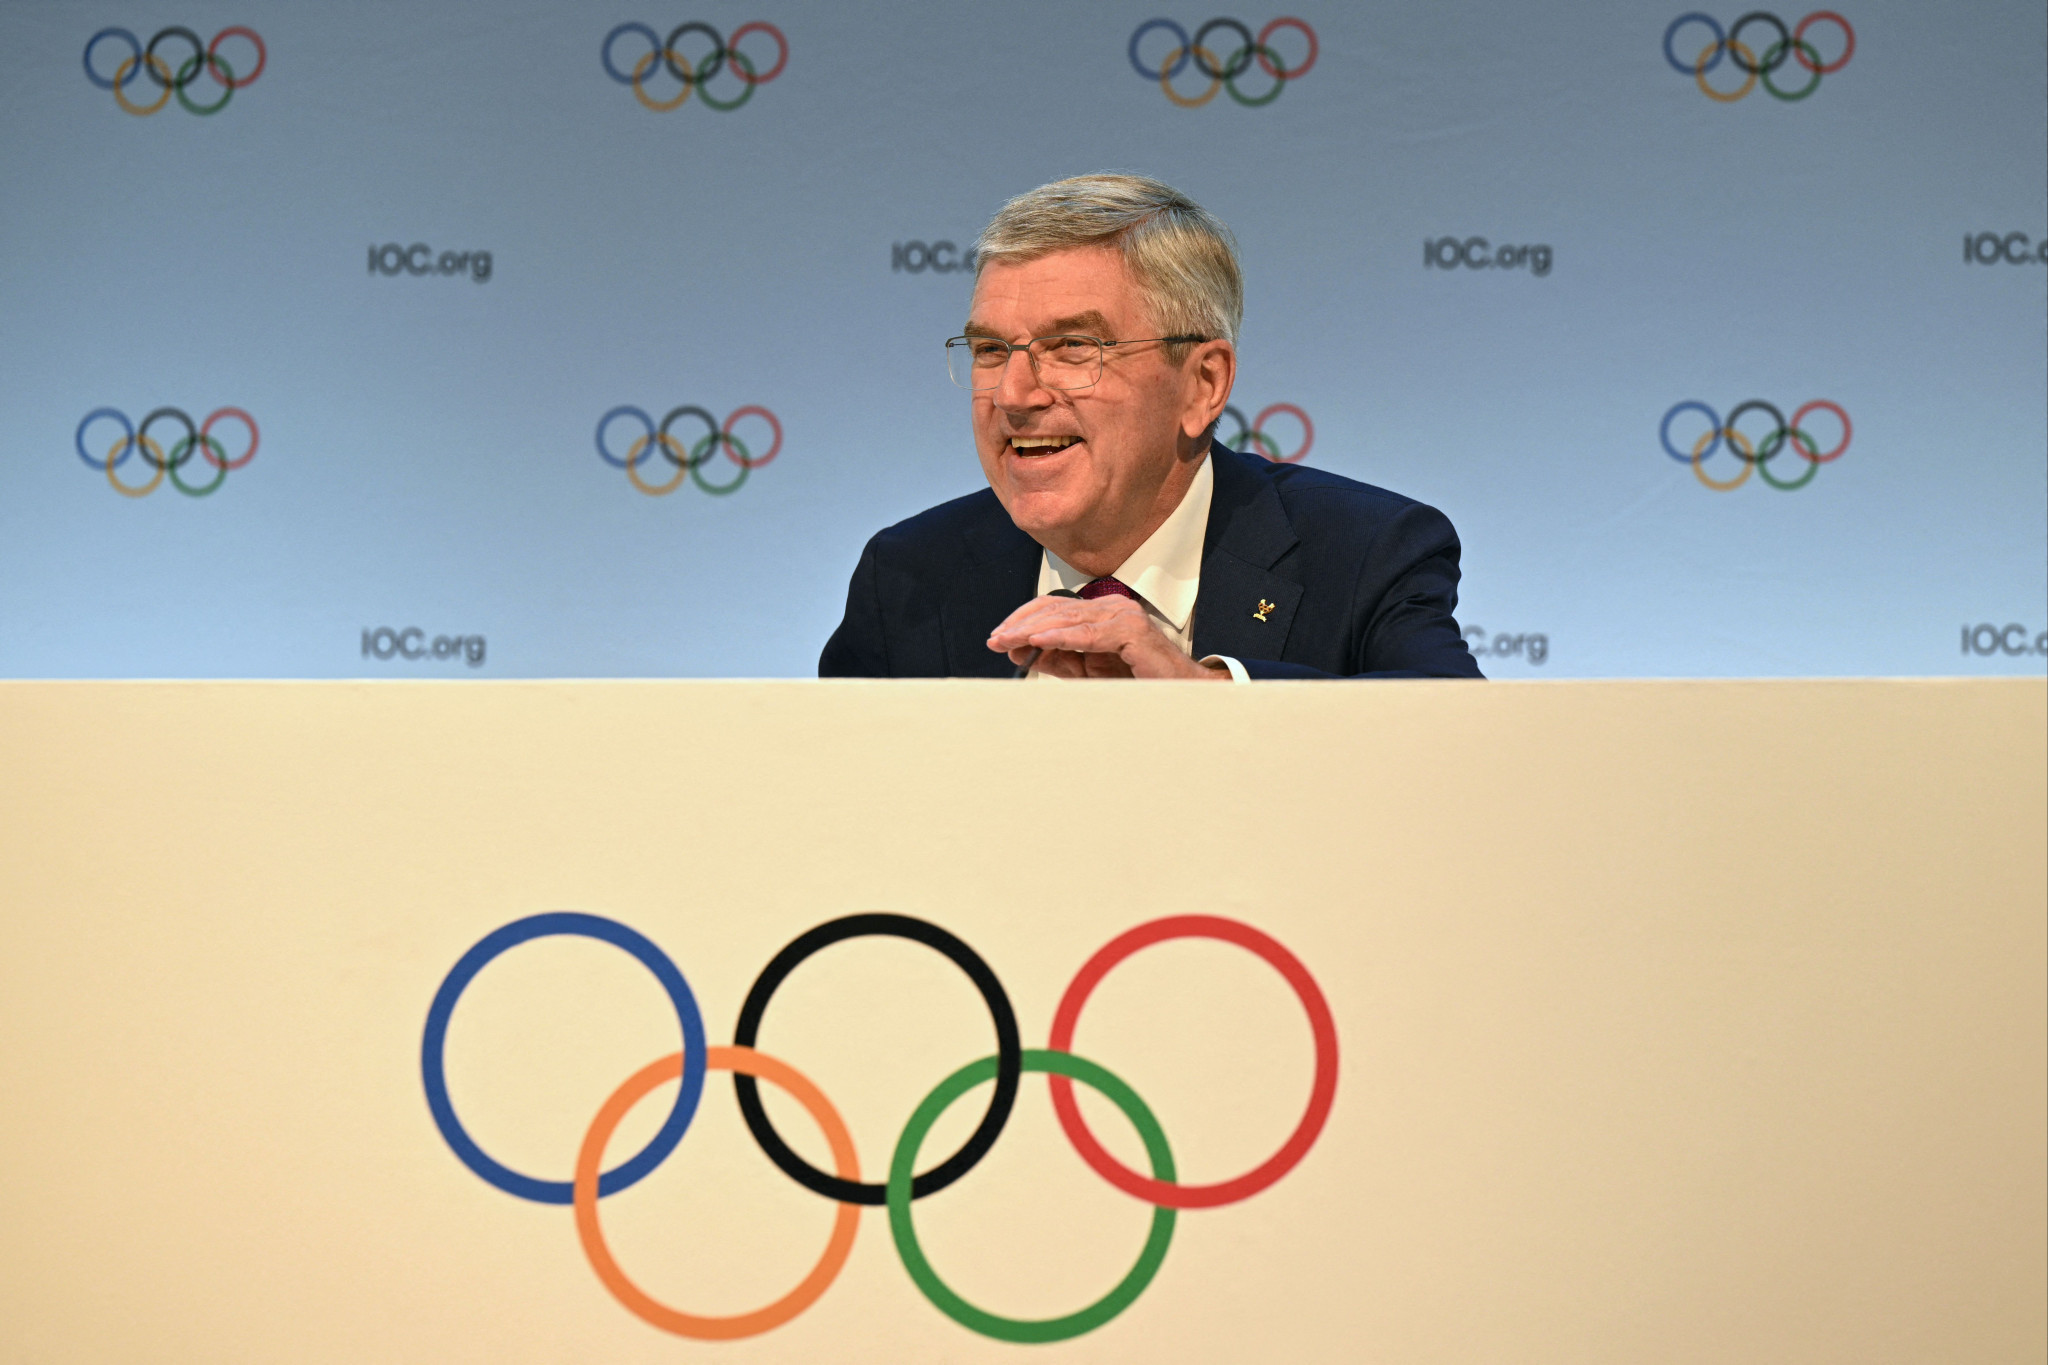 IOC President Thomas Bach again refused to rule out an Olympic Charter amendment to allow him to run again as President ©Getty Images (Image obtained at insidethegames.biz)